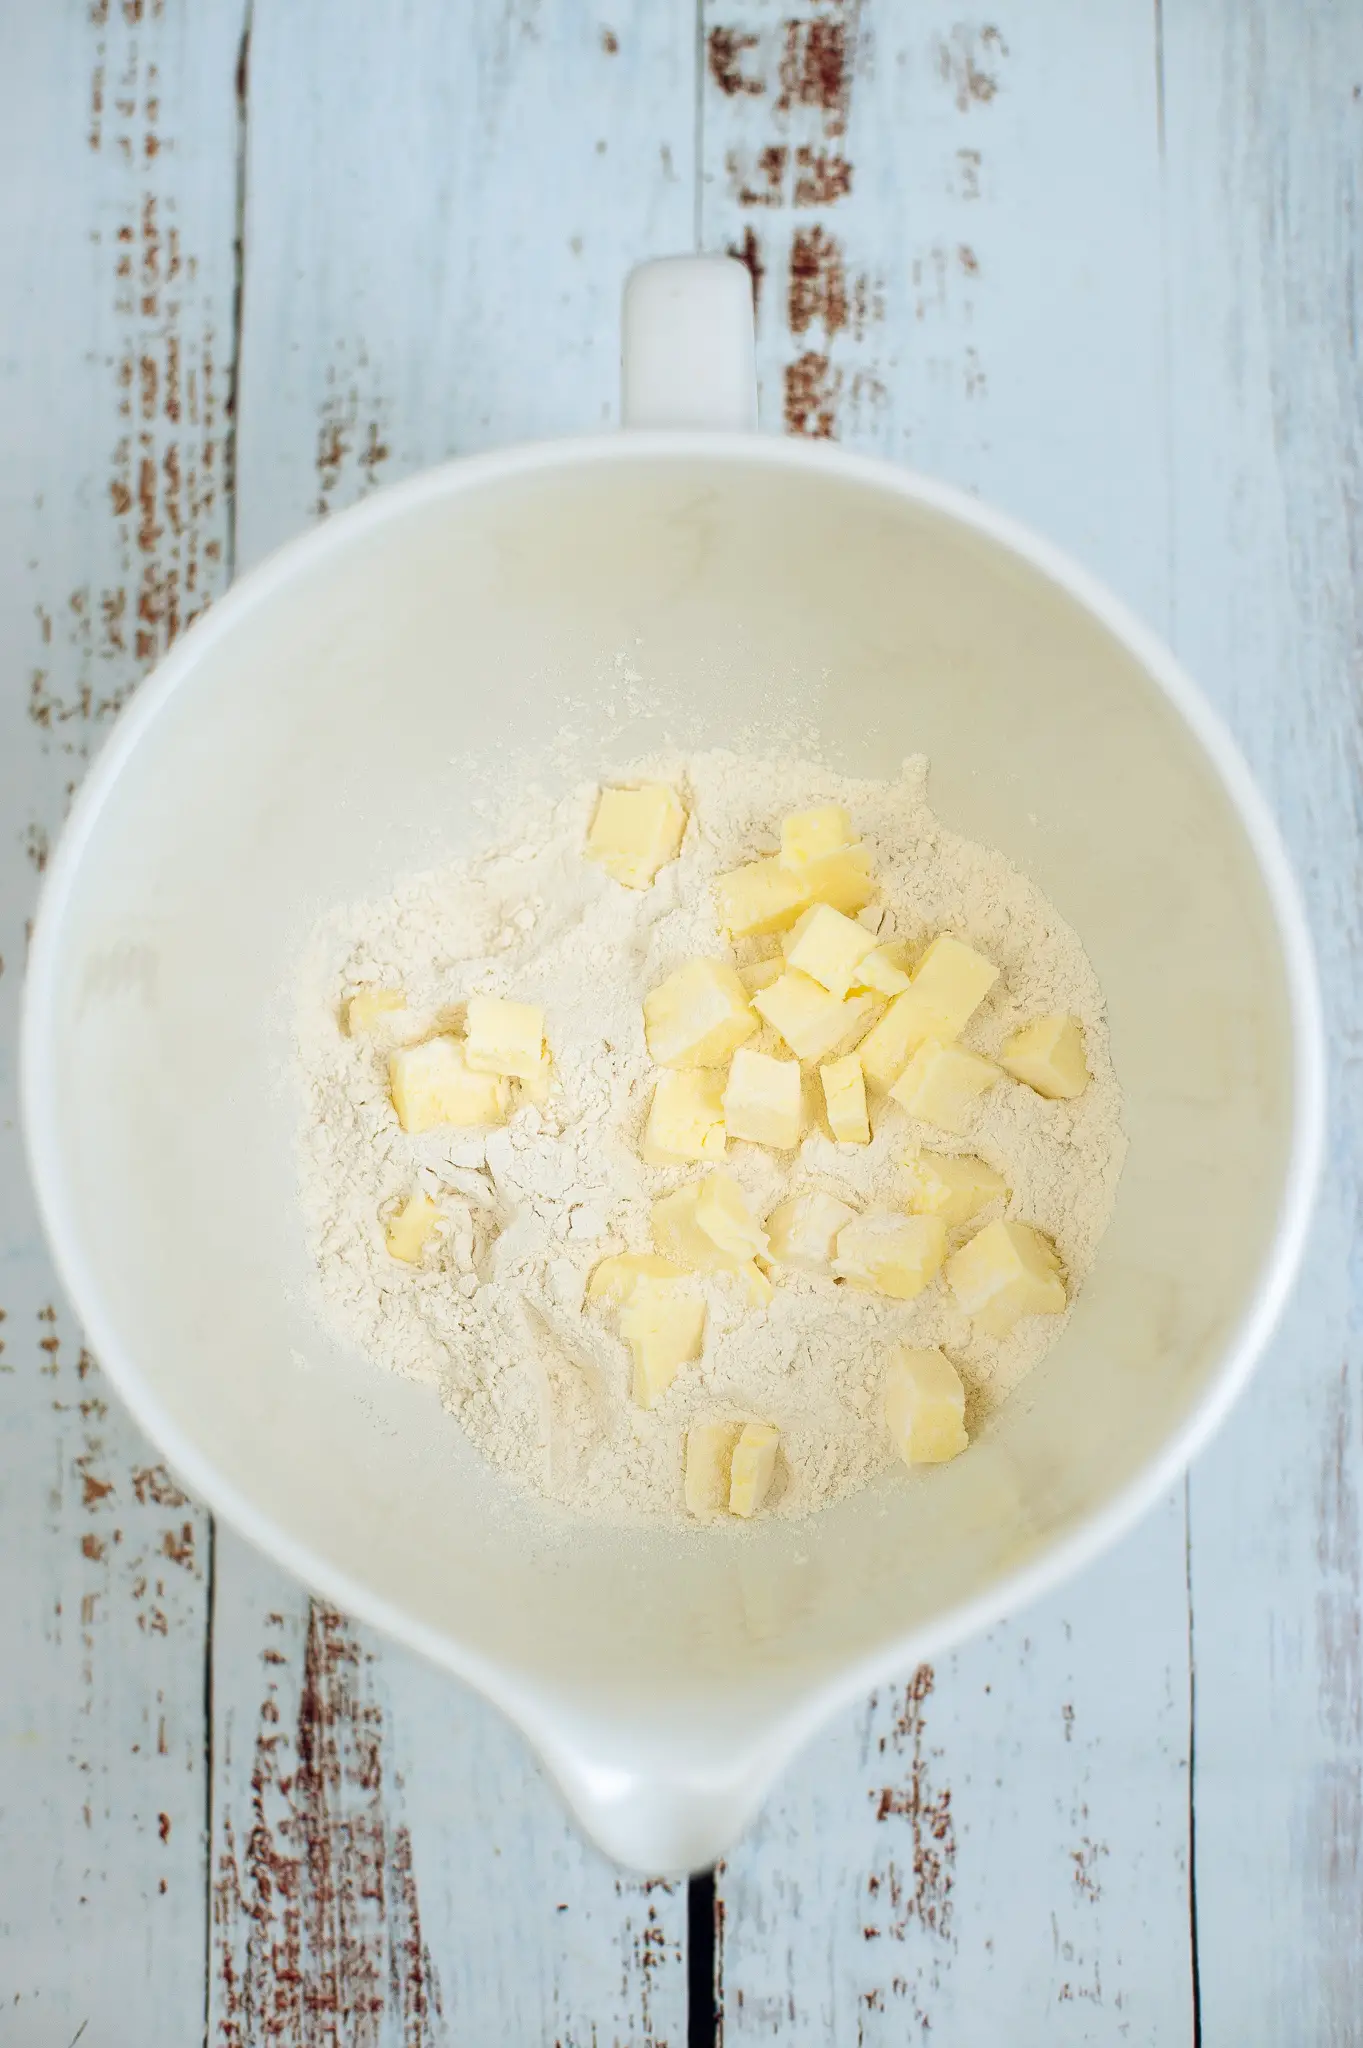 Cubed butter being added to flour mixture.